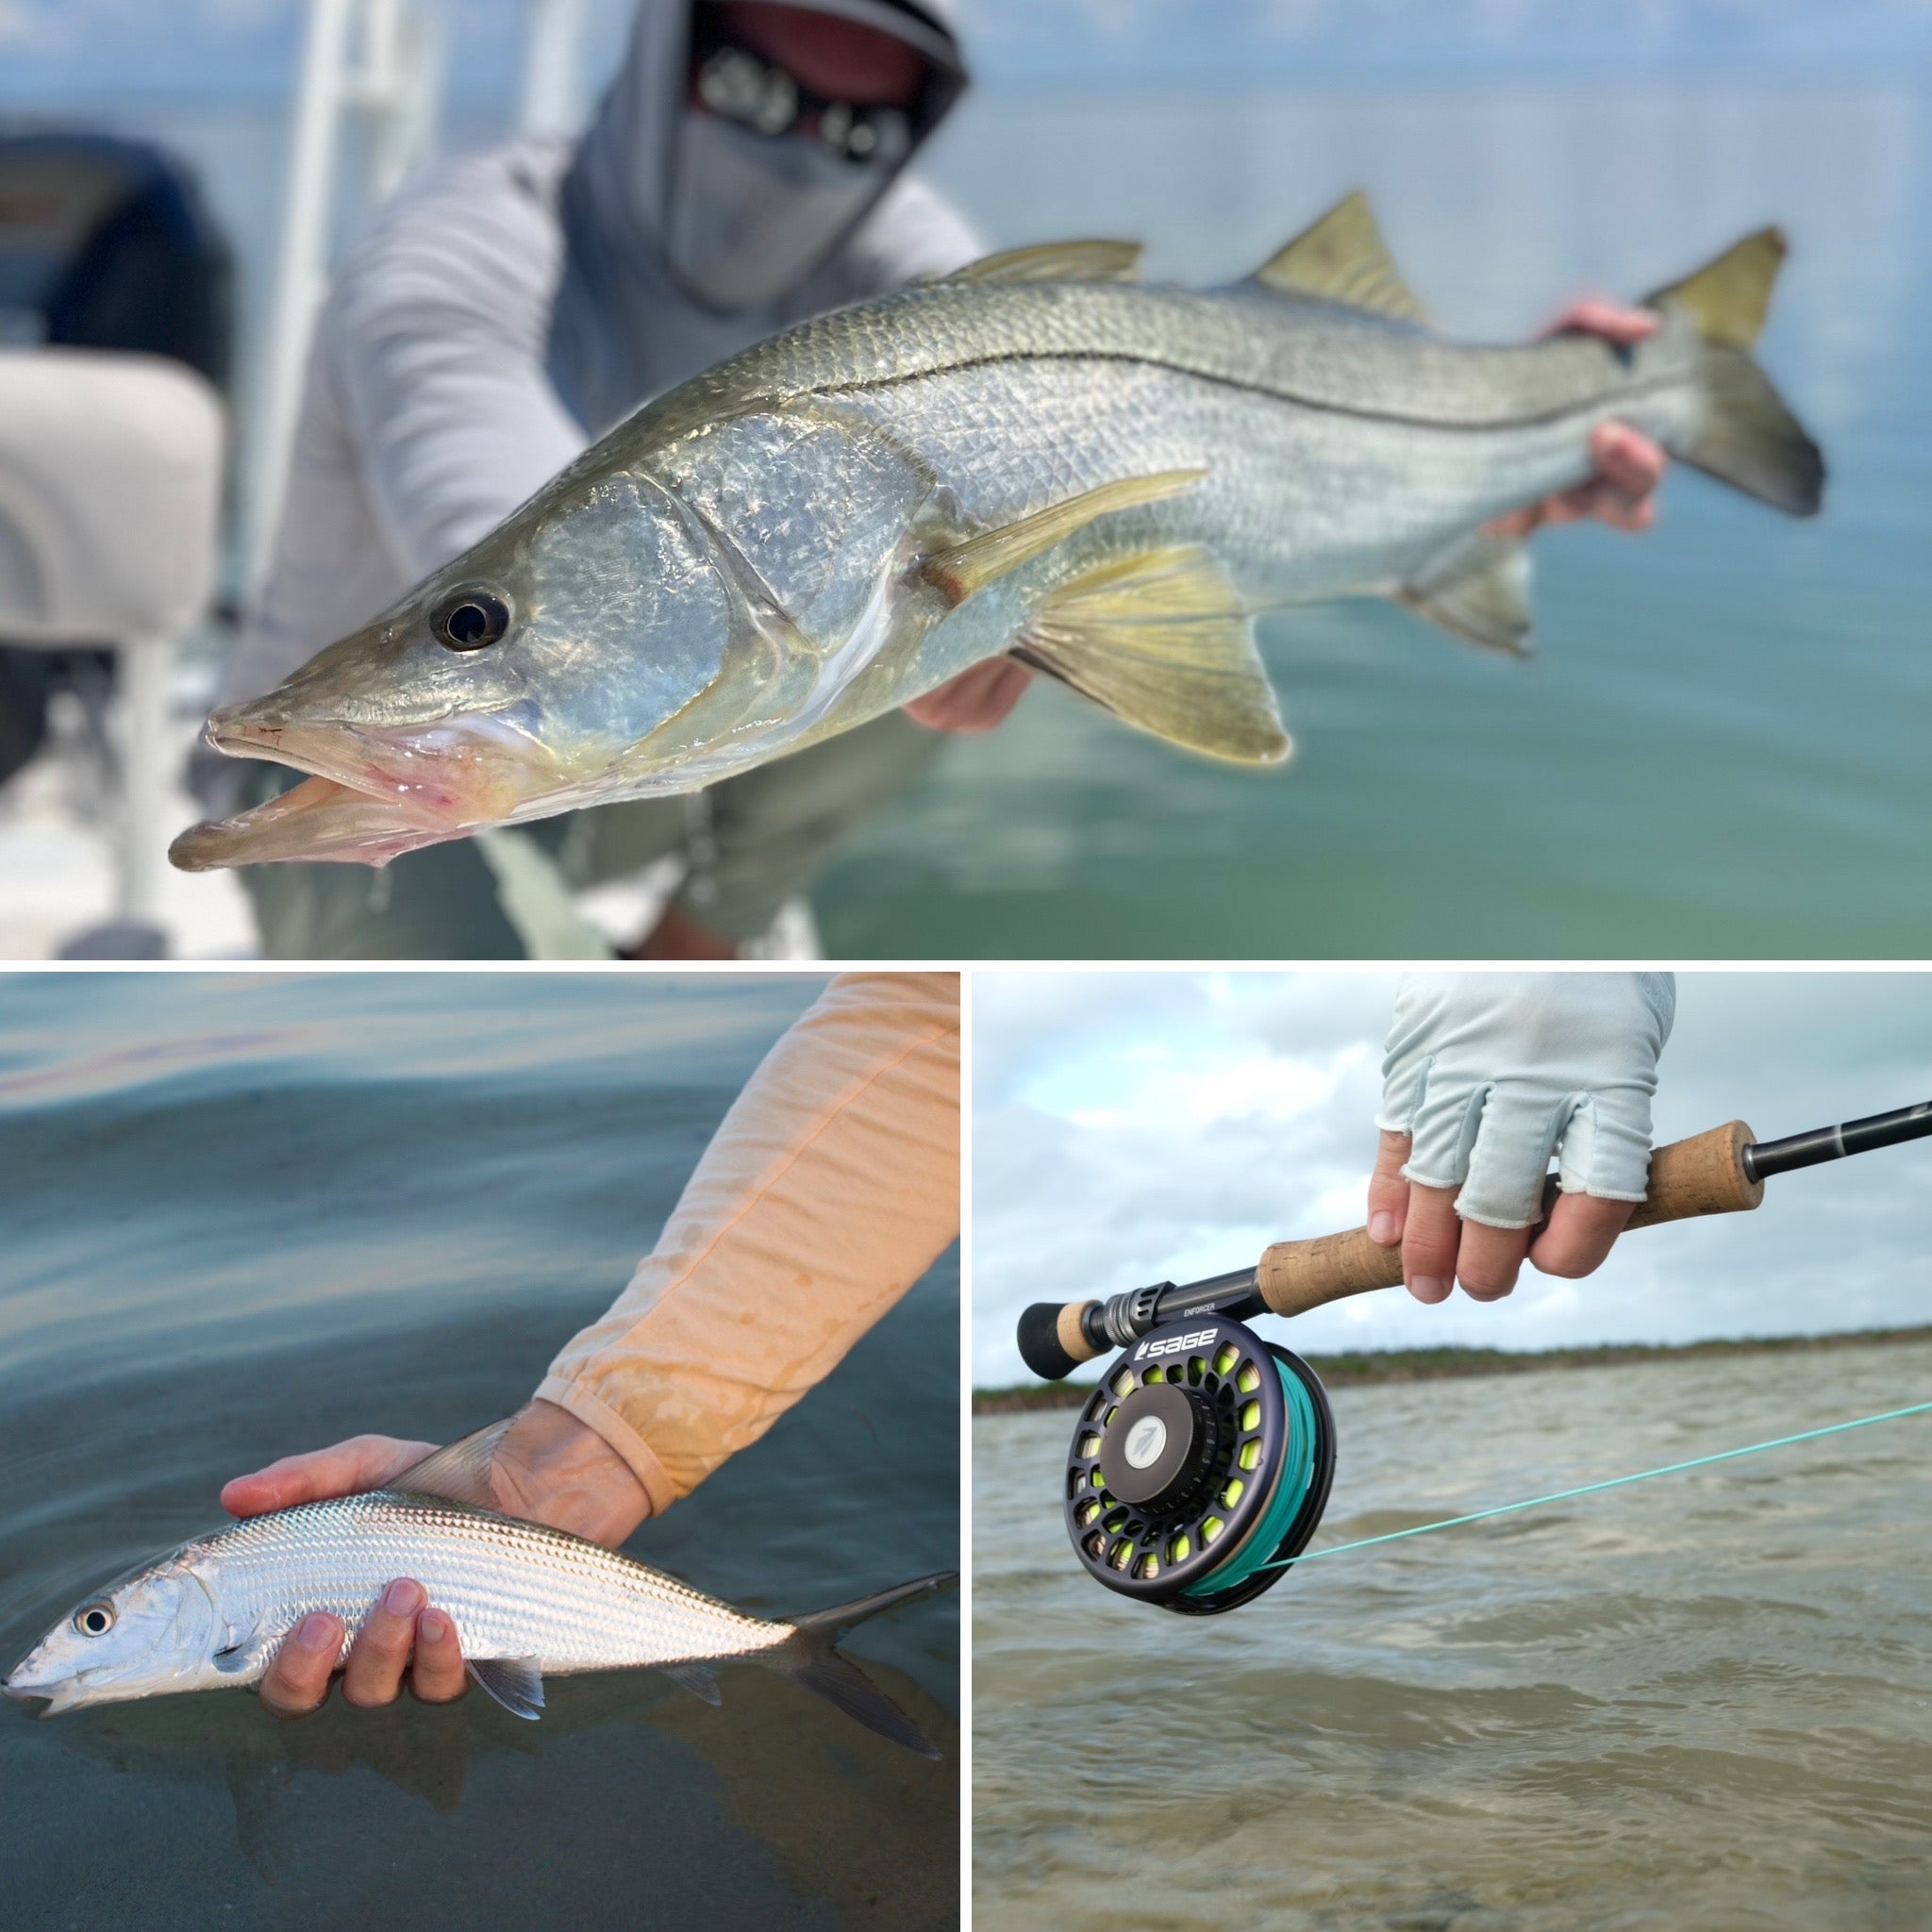 snook, fly rod, and bonefish